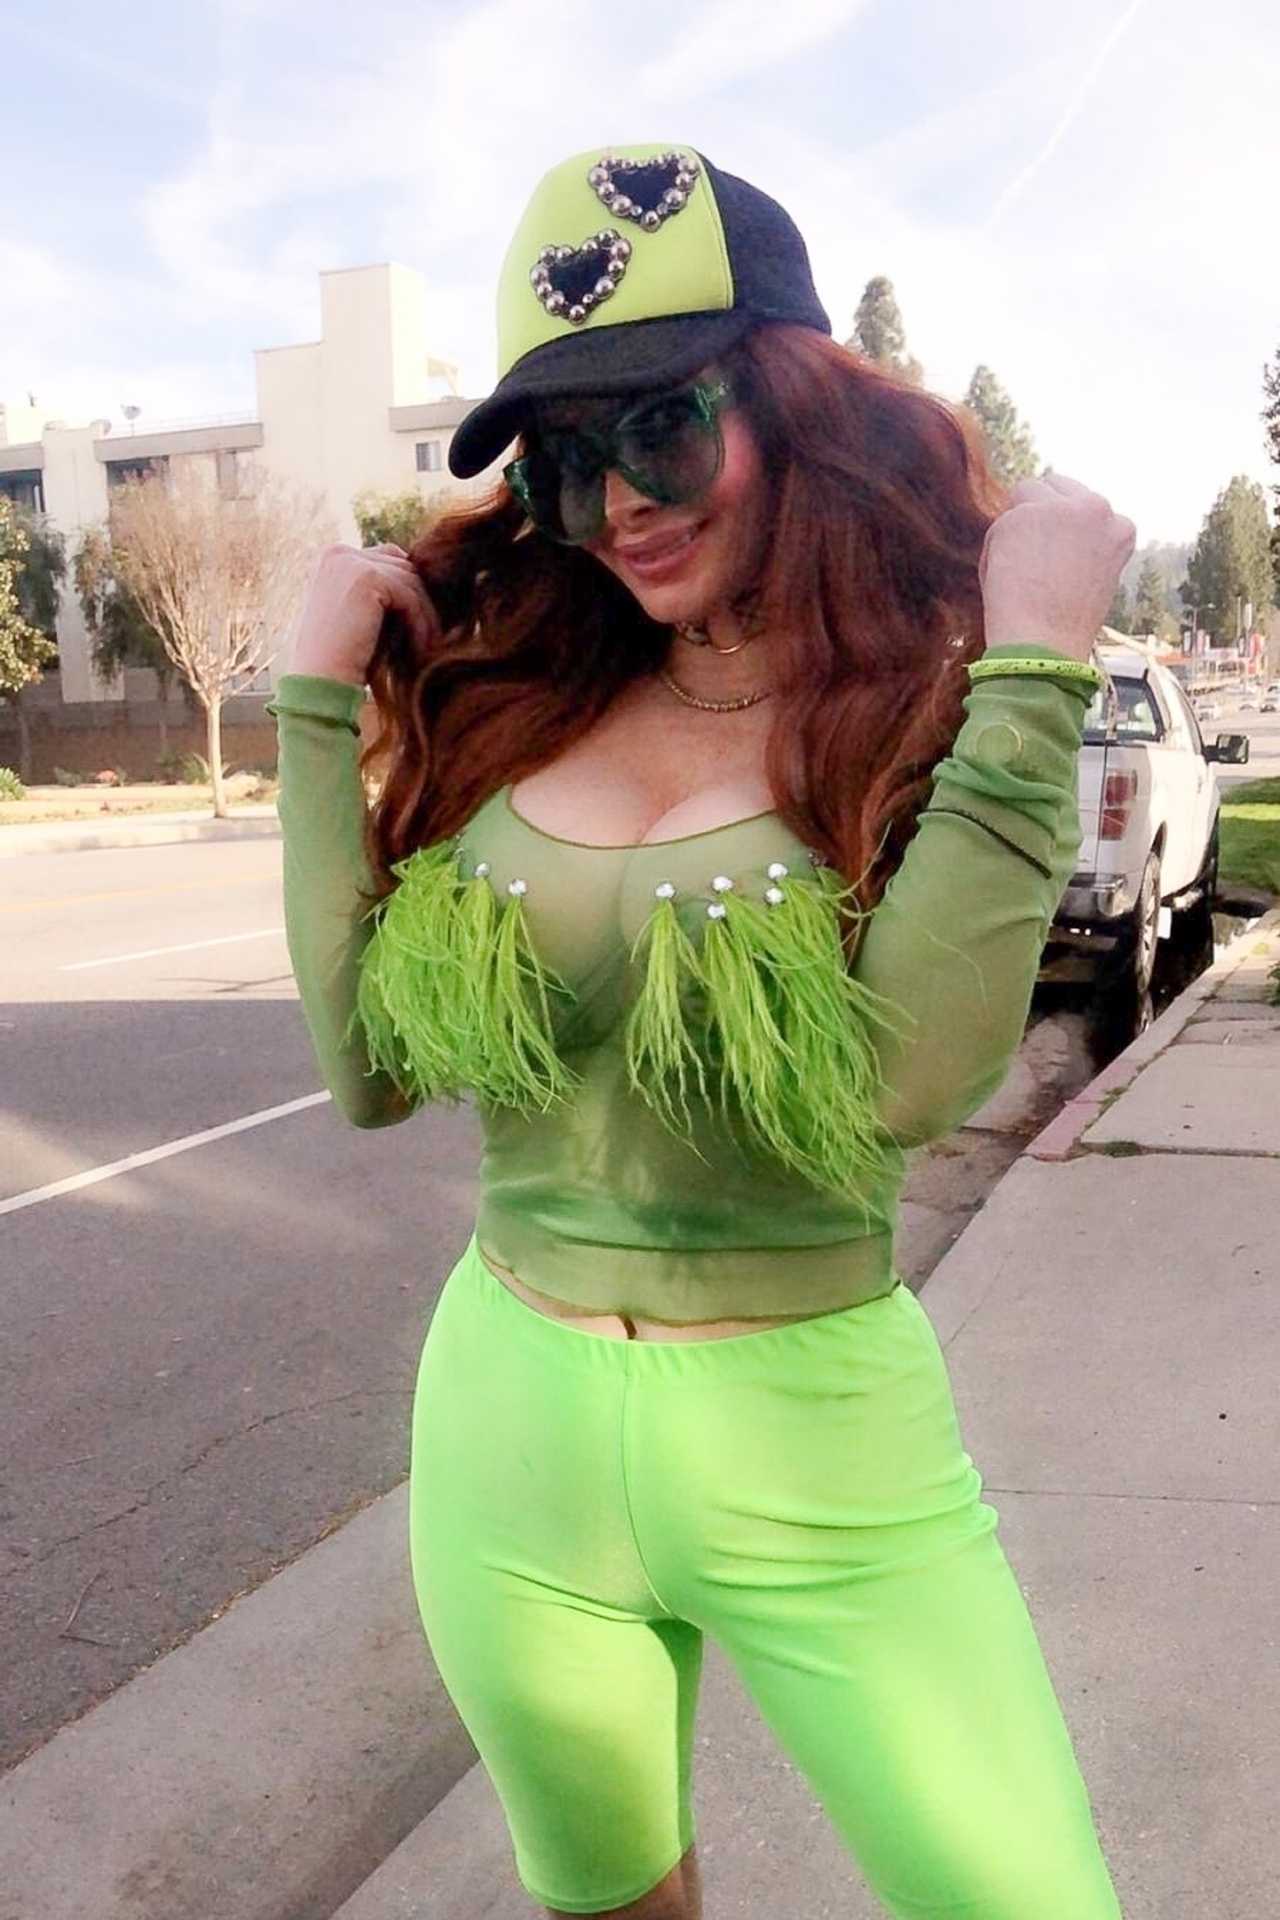 Phoebe Price â€“ In a neon green look while out walking her dog in Beverly Hills